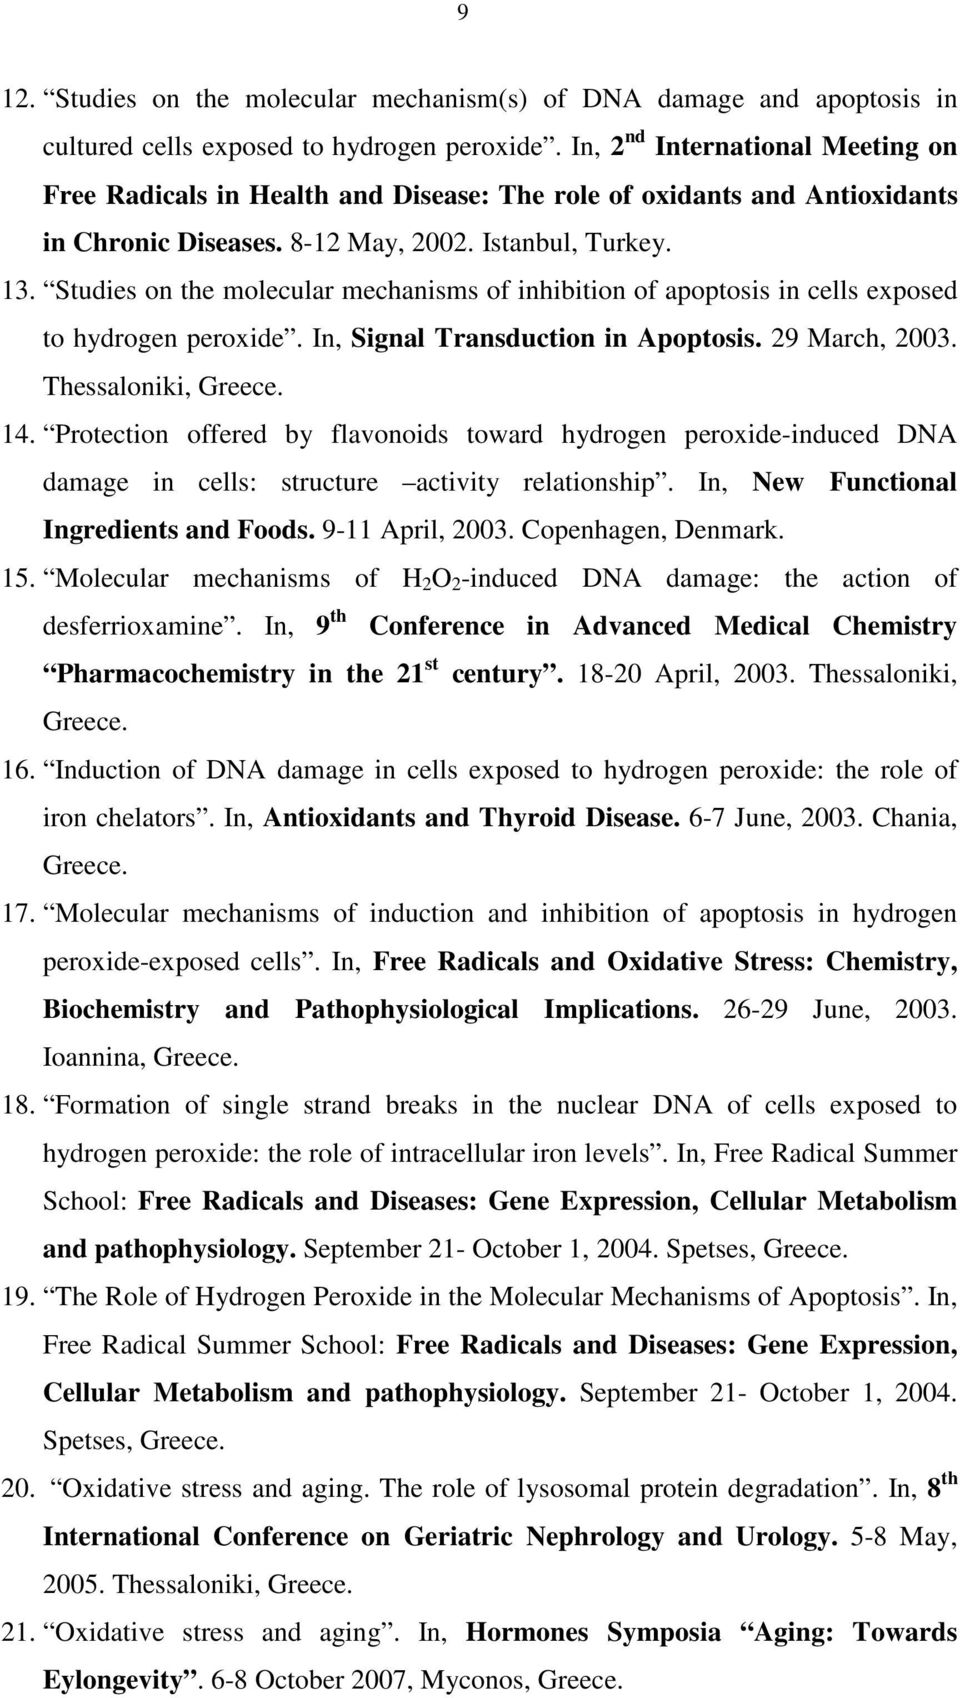 Studies on the molecular mechanisms of inhibition of apoptosis in cells exposed to hydrogen peroxide. In, Signal Transduction in Apoptosis. 29 March, 2003. Thessaloniki, Greece. 14.